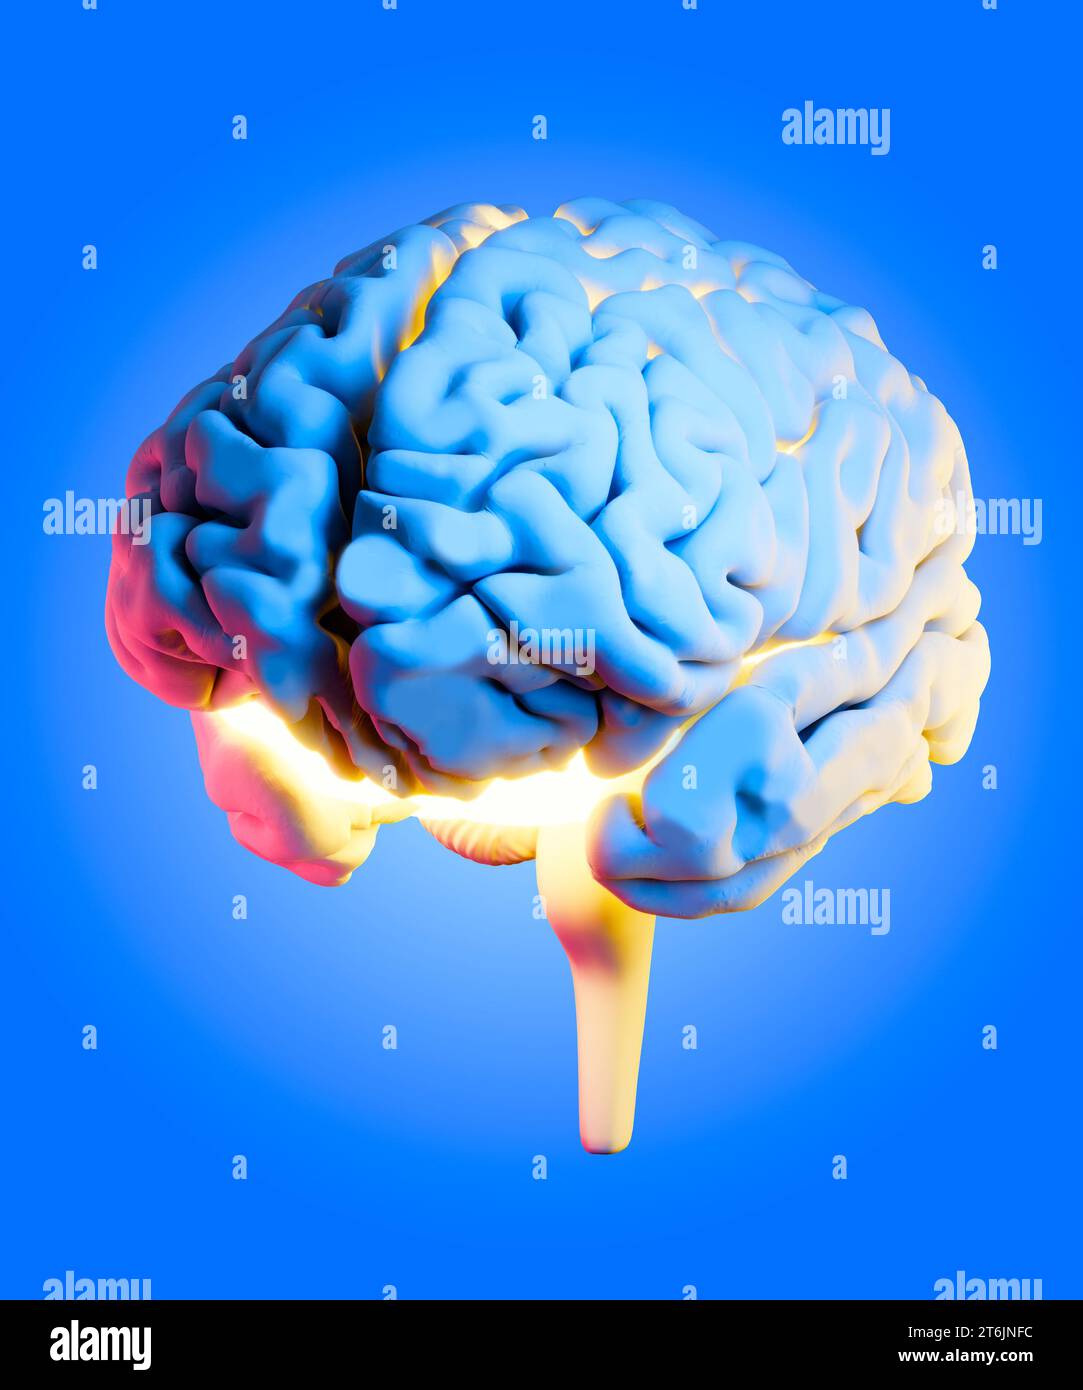 Neurology, philosophy: connections, the development of thought and reflection, the infinite possibilities of the brain and mind. Human anatomy Stock Photo